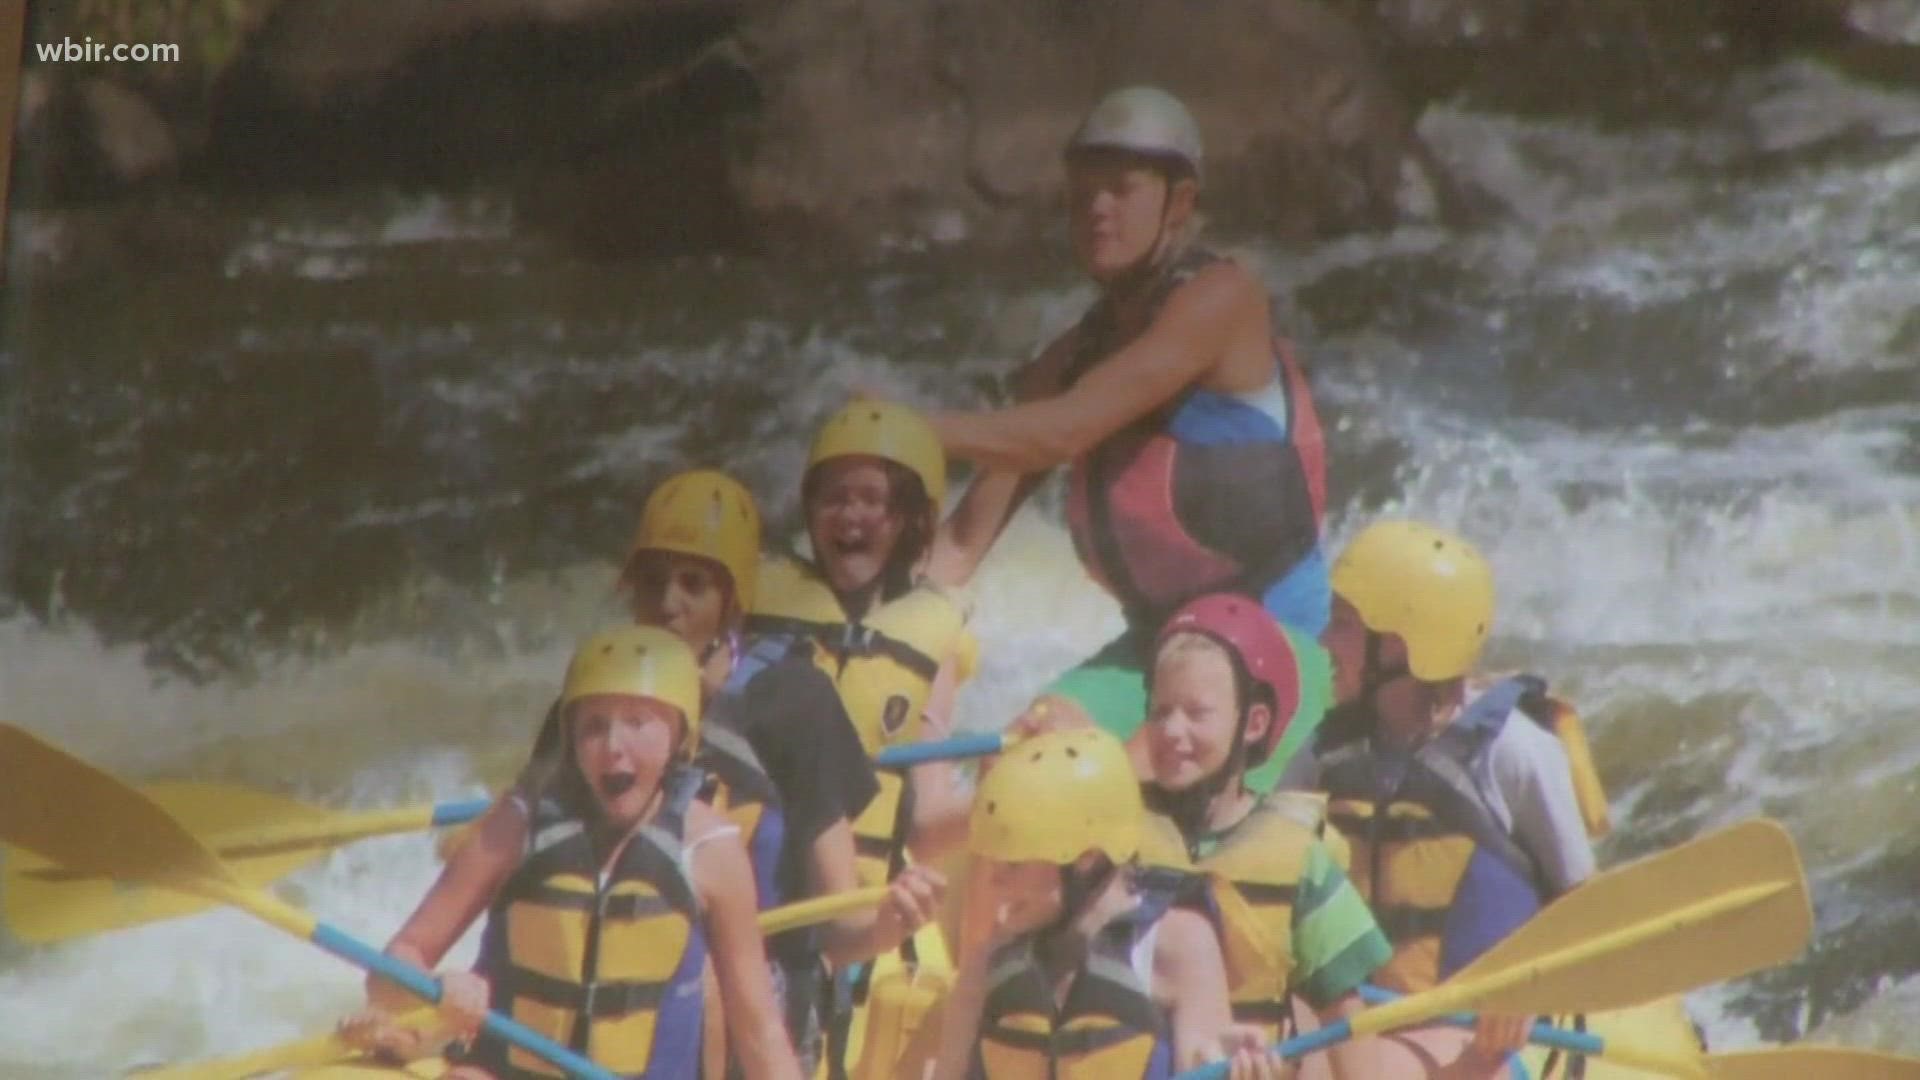 Brenda Schultz, co-owner of Rafting in the Smokies, says despite a rocky start due to COVID, the current season has been very successful.